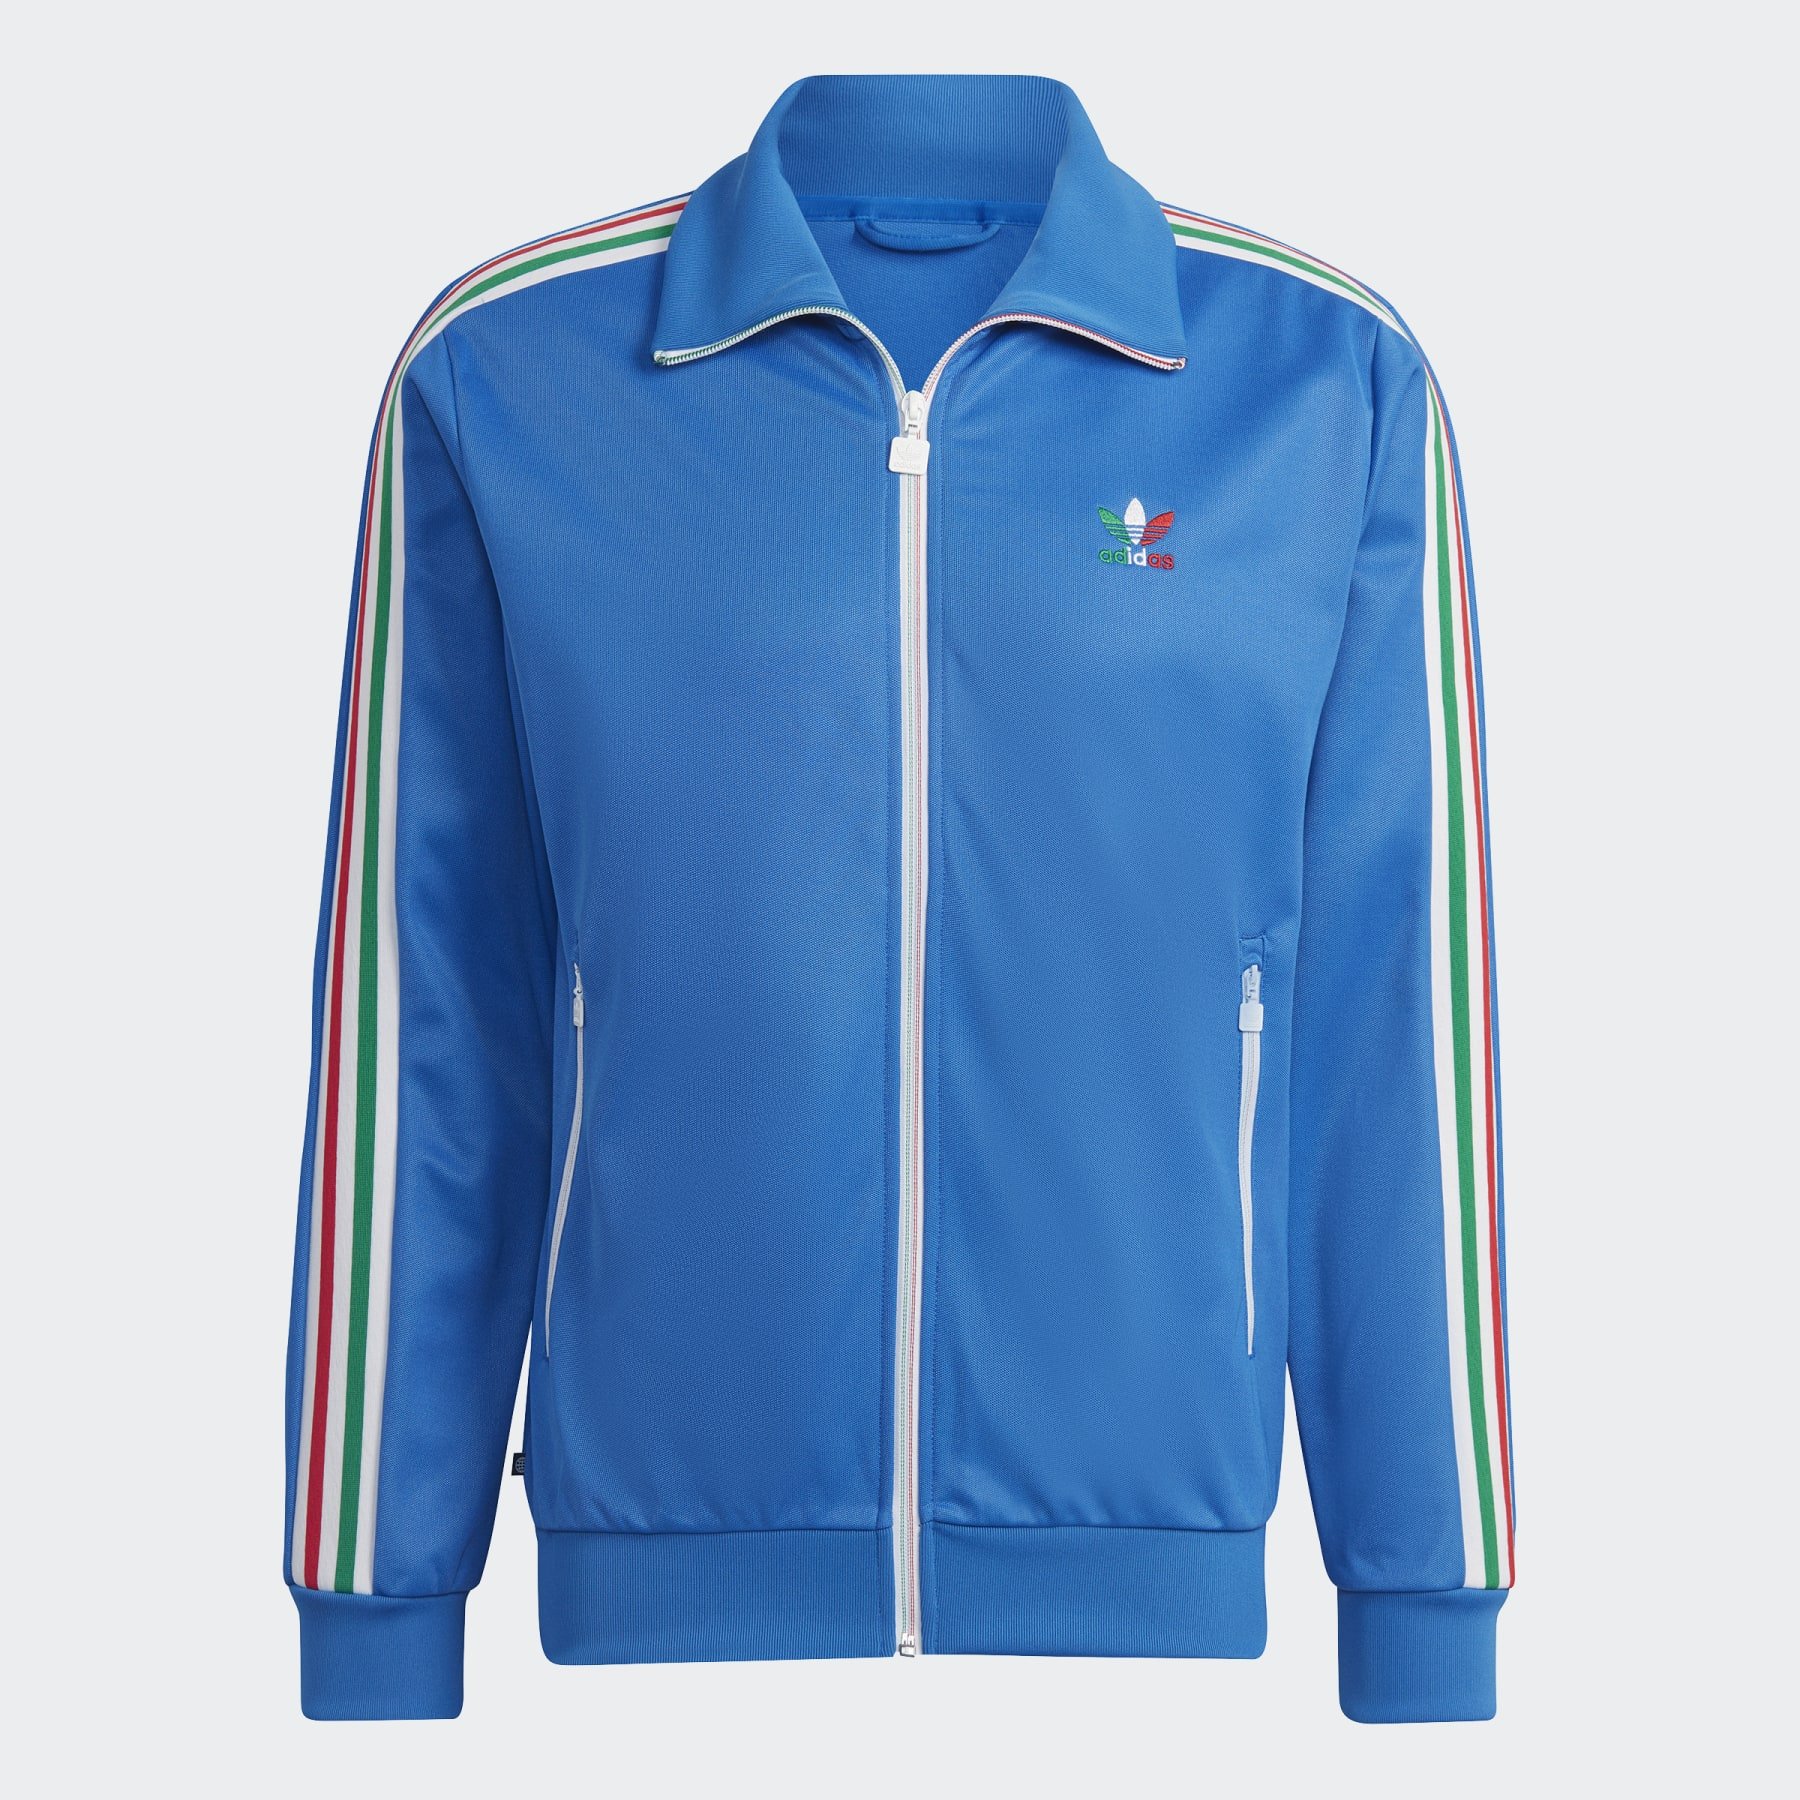 adidas Beckenbauer Nations Track Jacket Bright Royal/White/Red/Green